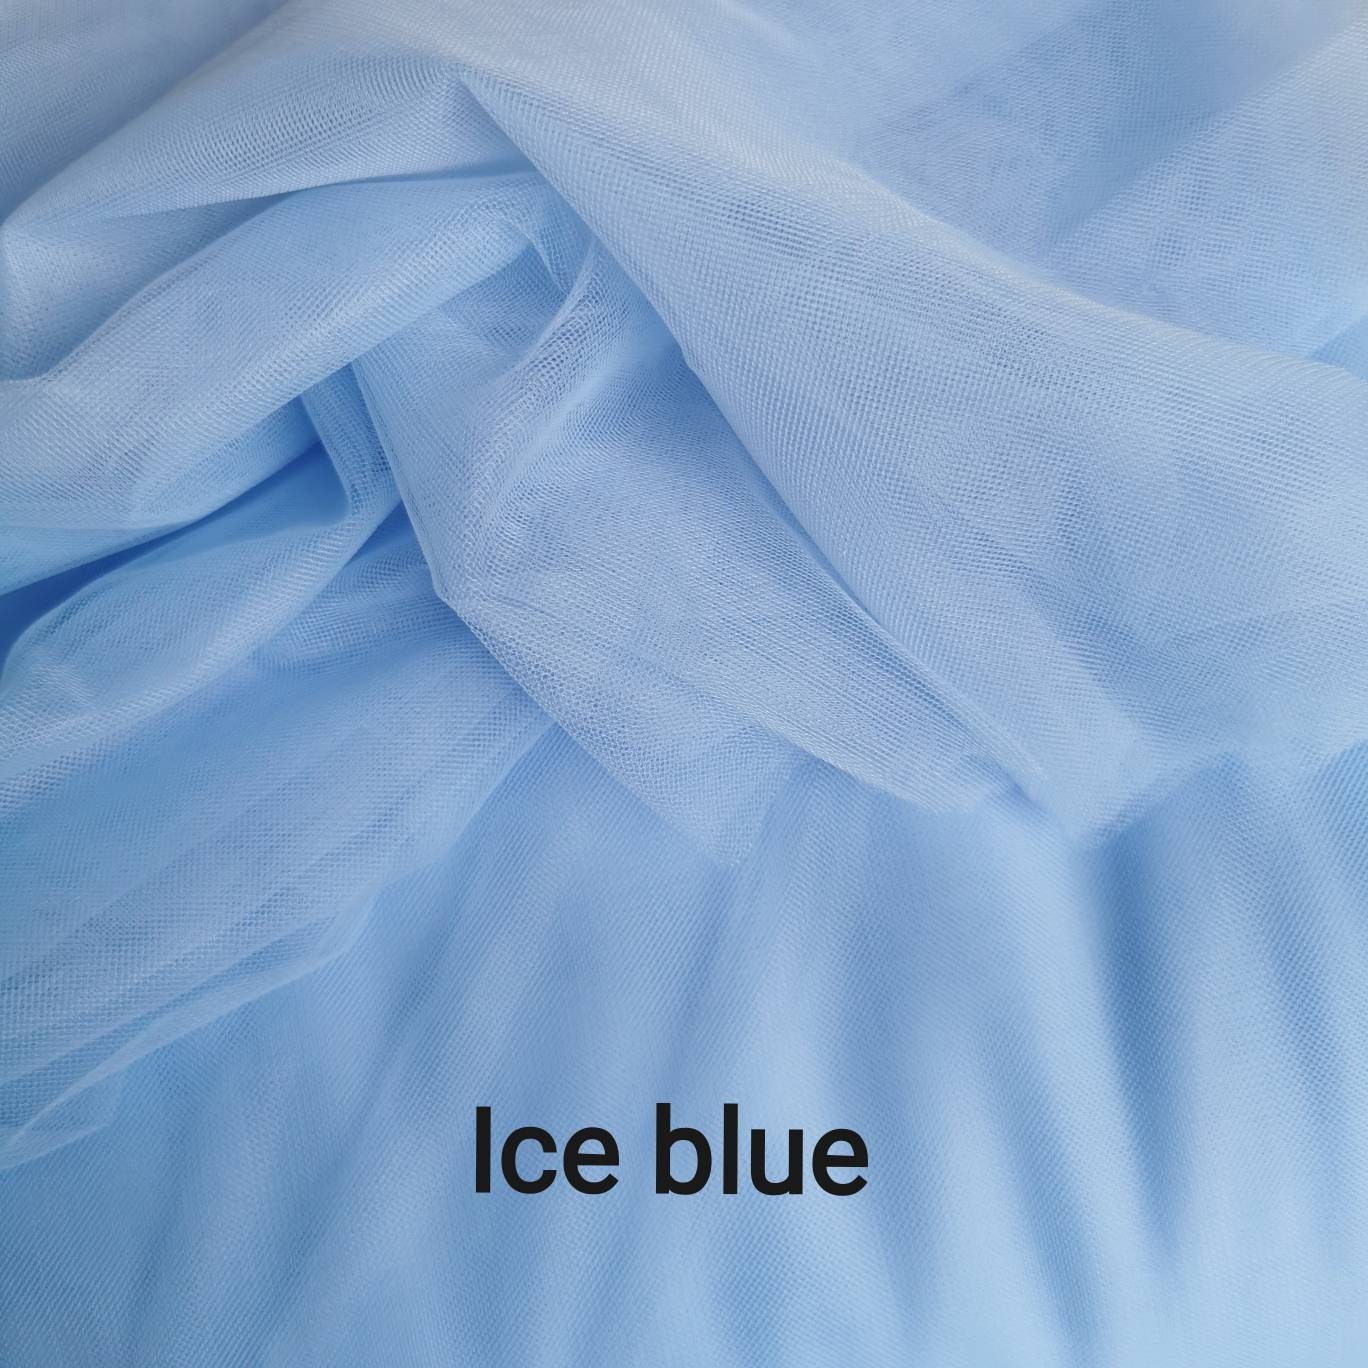 Soft Tulle Fabric 118 / 3m Wide Mesh Fabric Sky Blue | Etsy